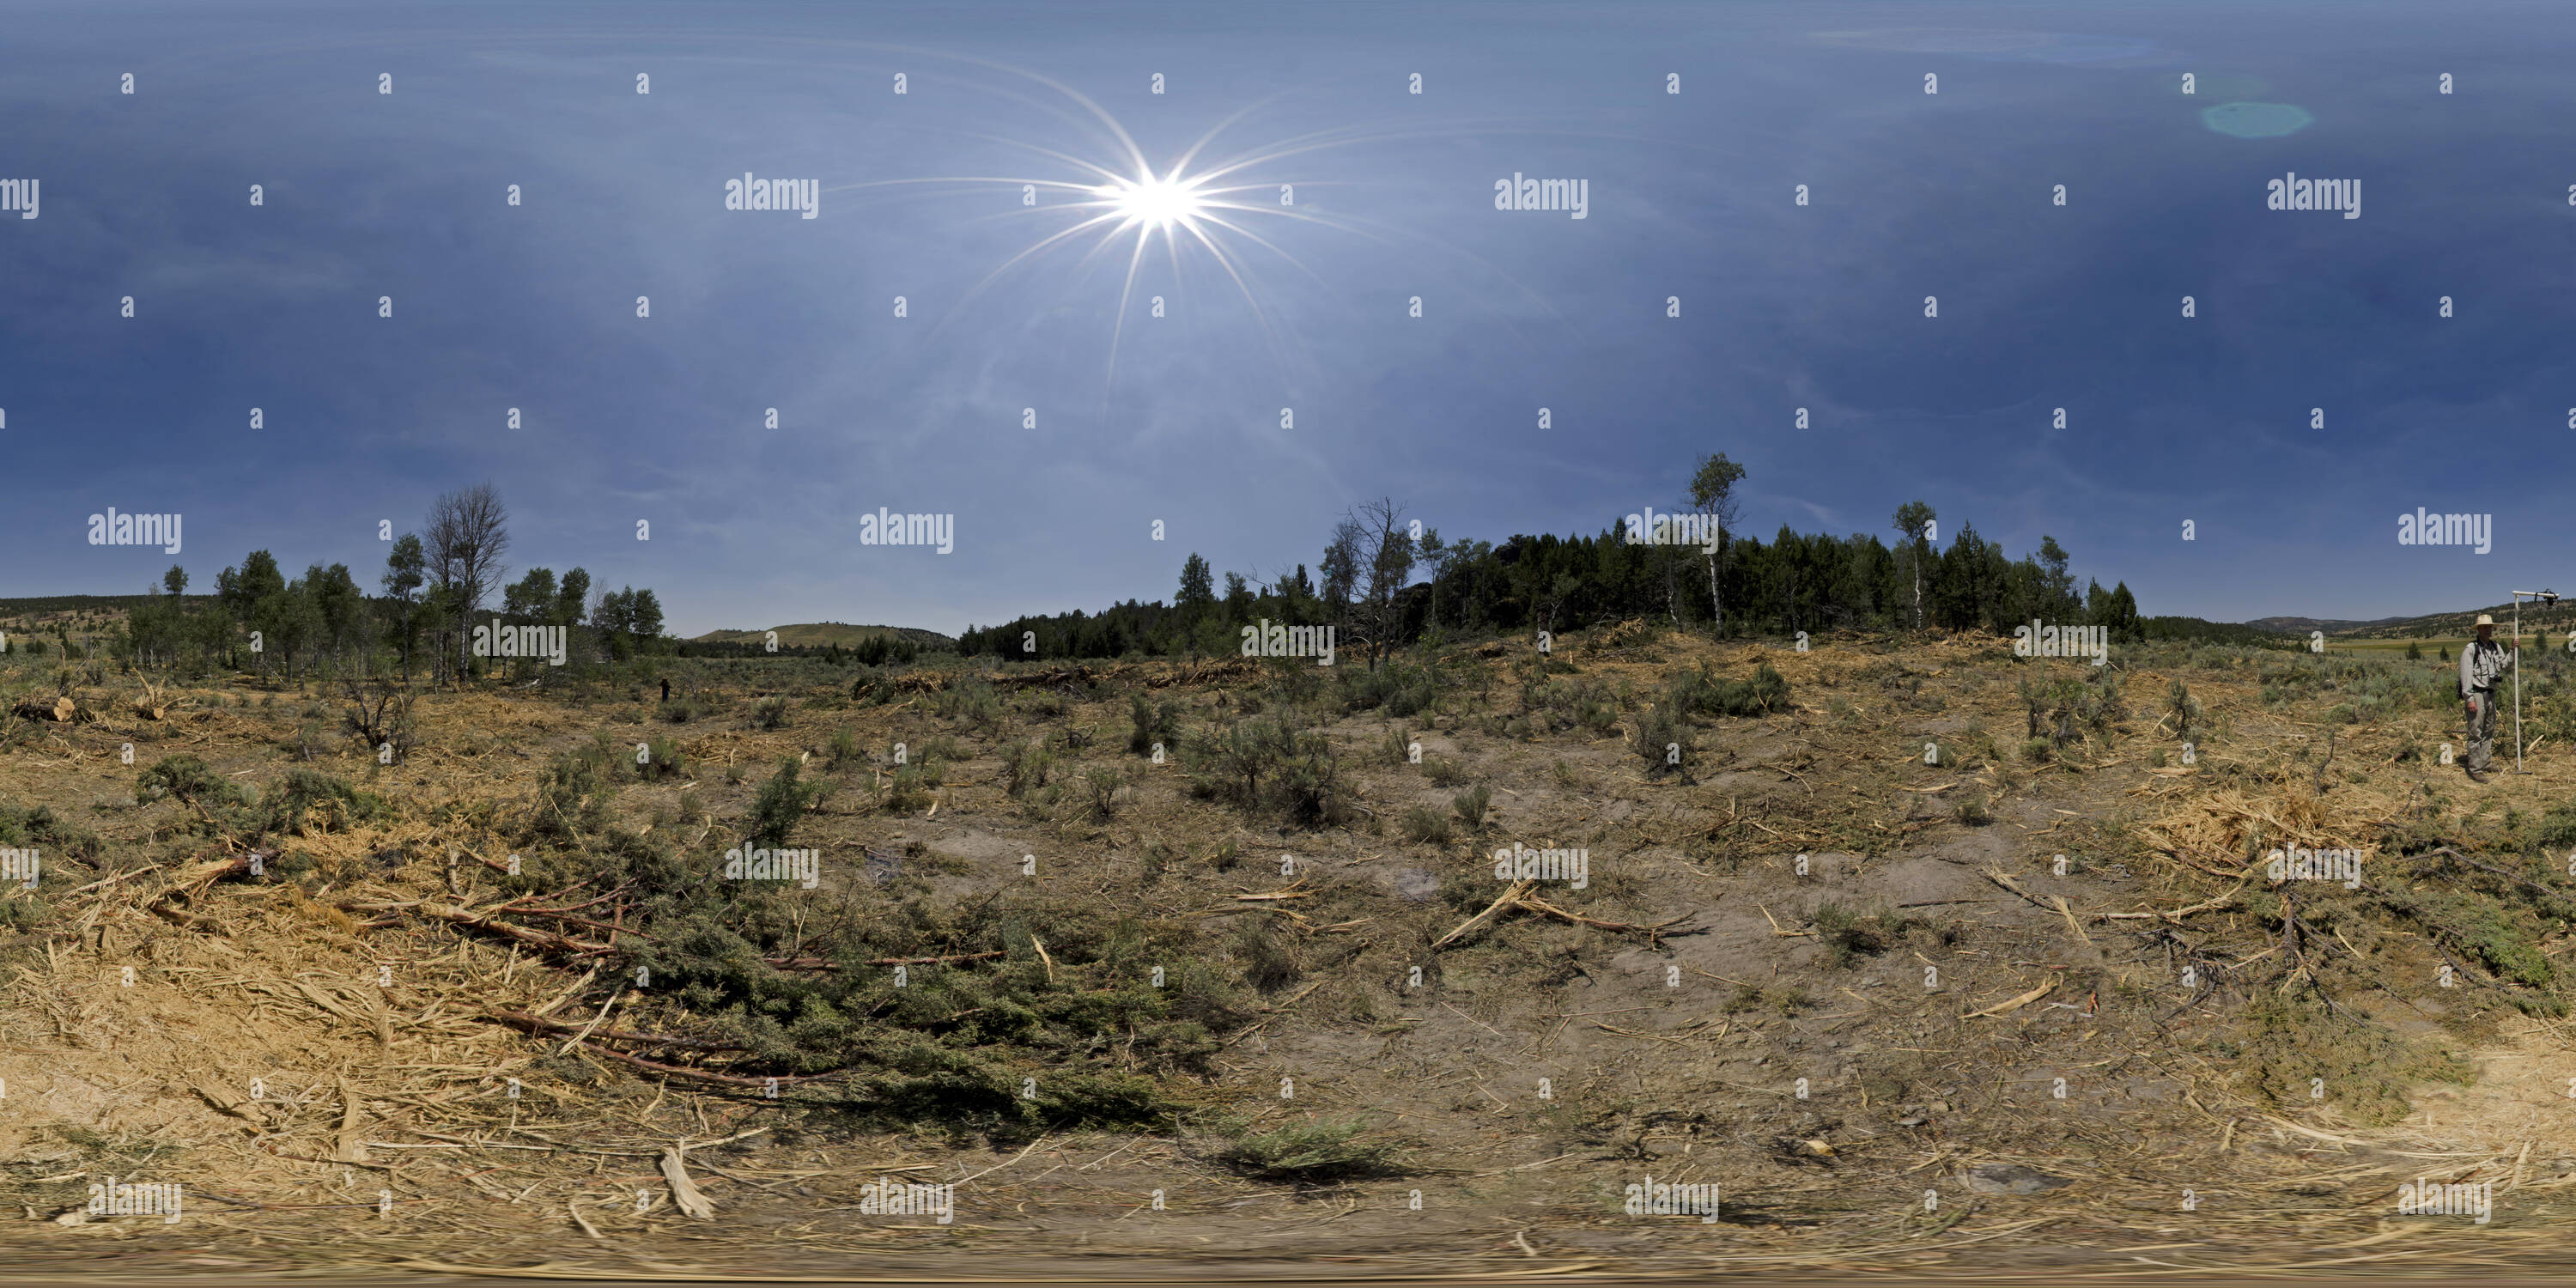 360 degree panoramic view of Result of Juniper Mastication to improve Sage Grouse Habitat